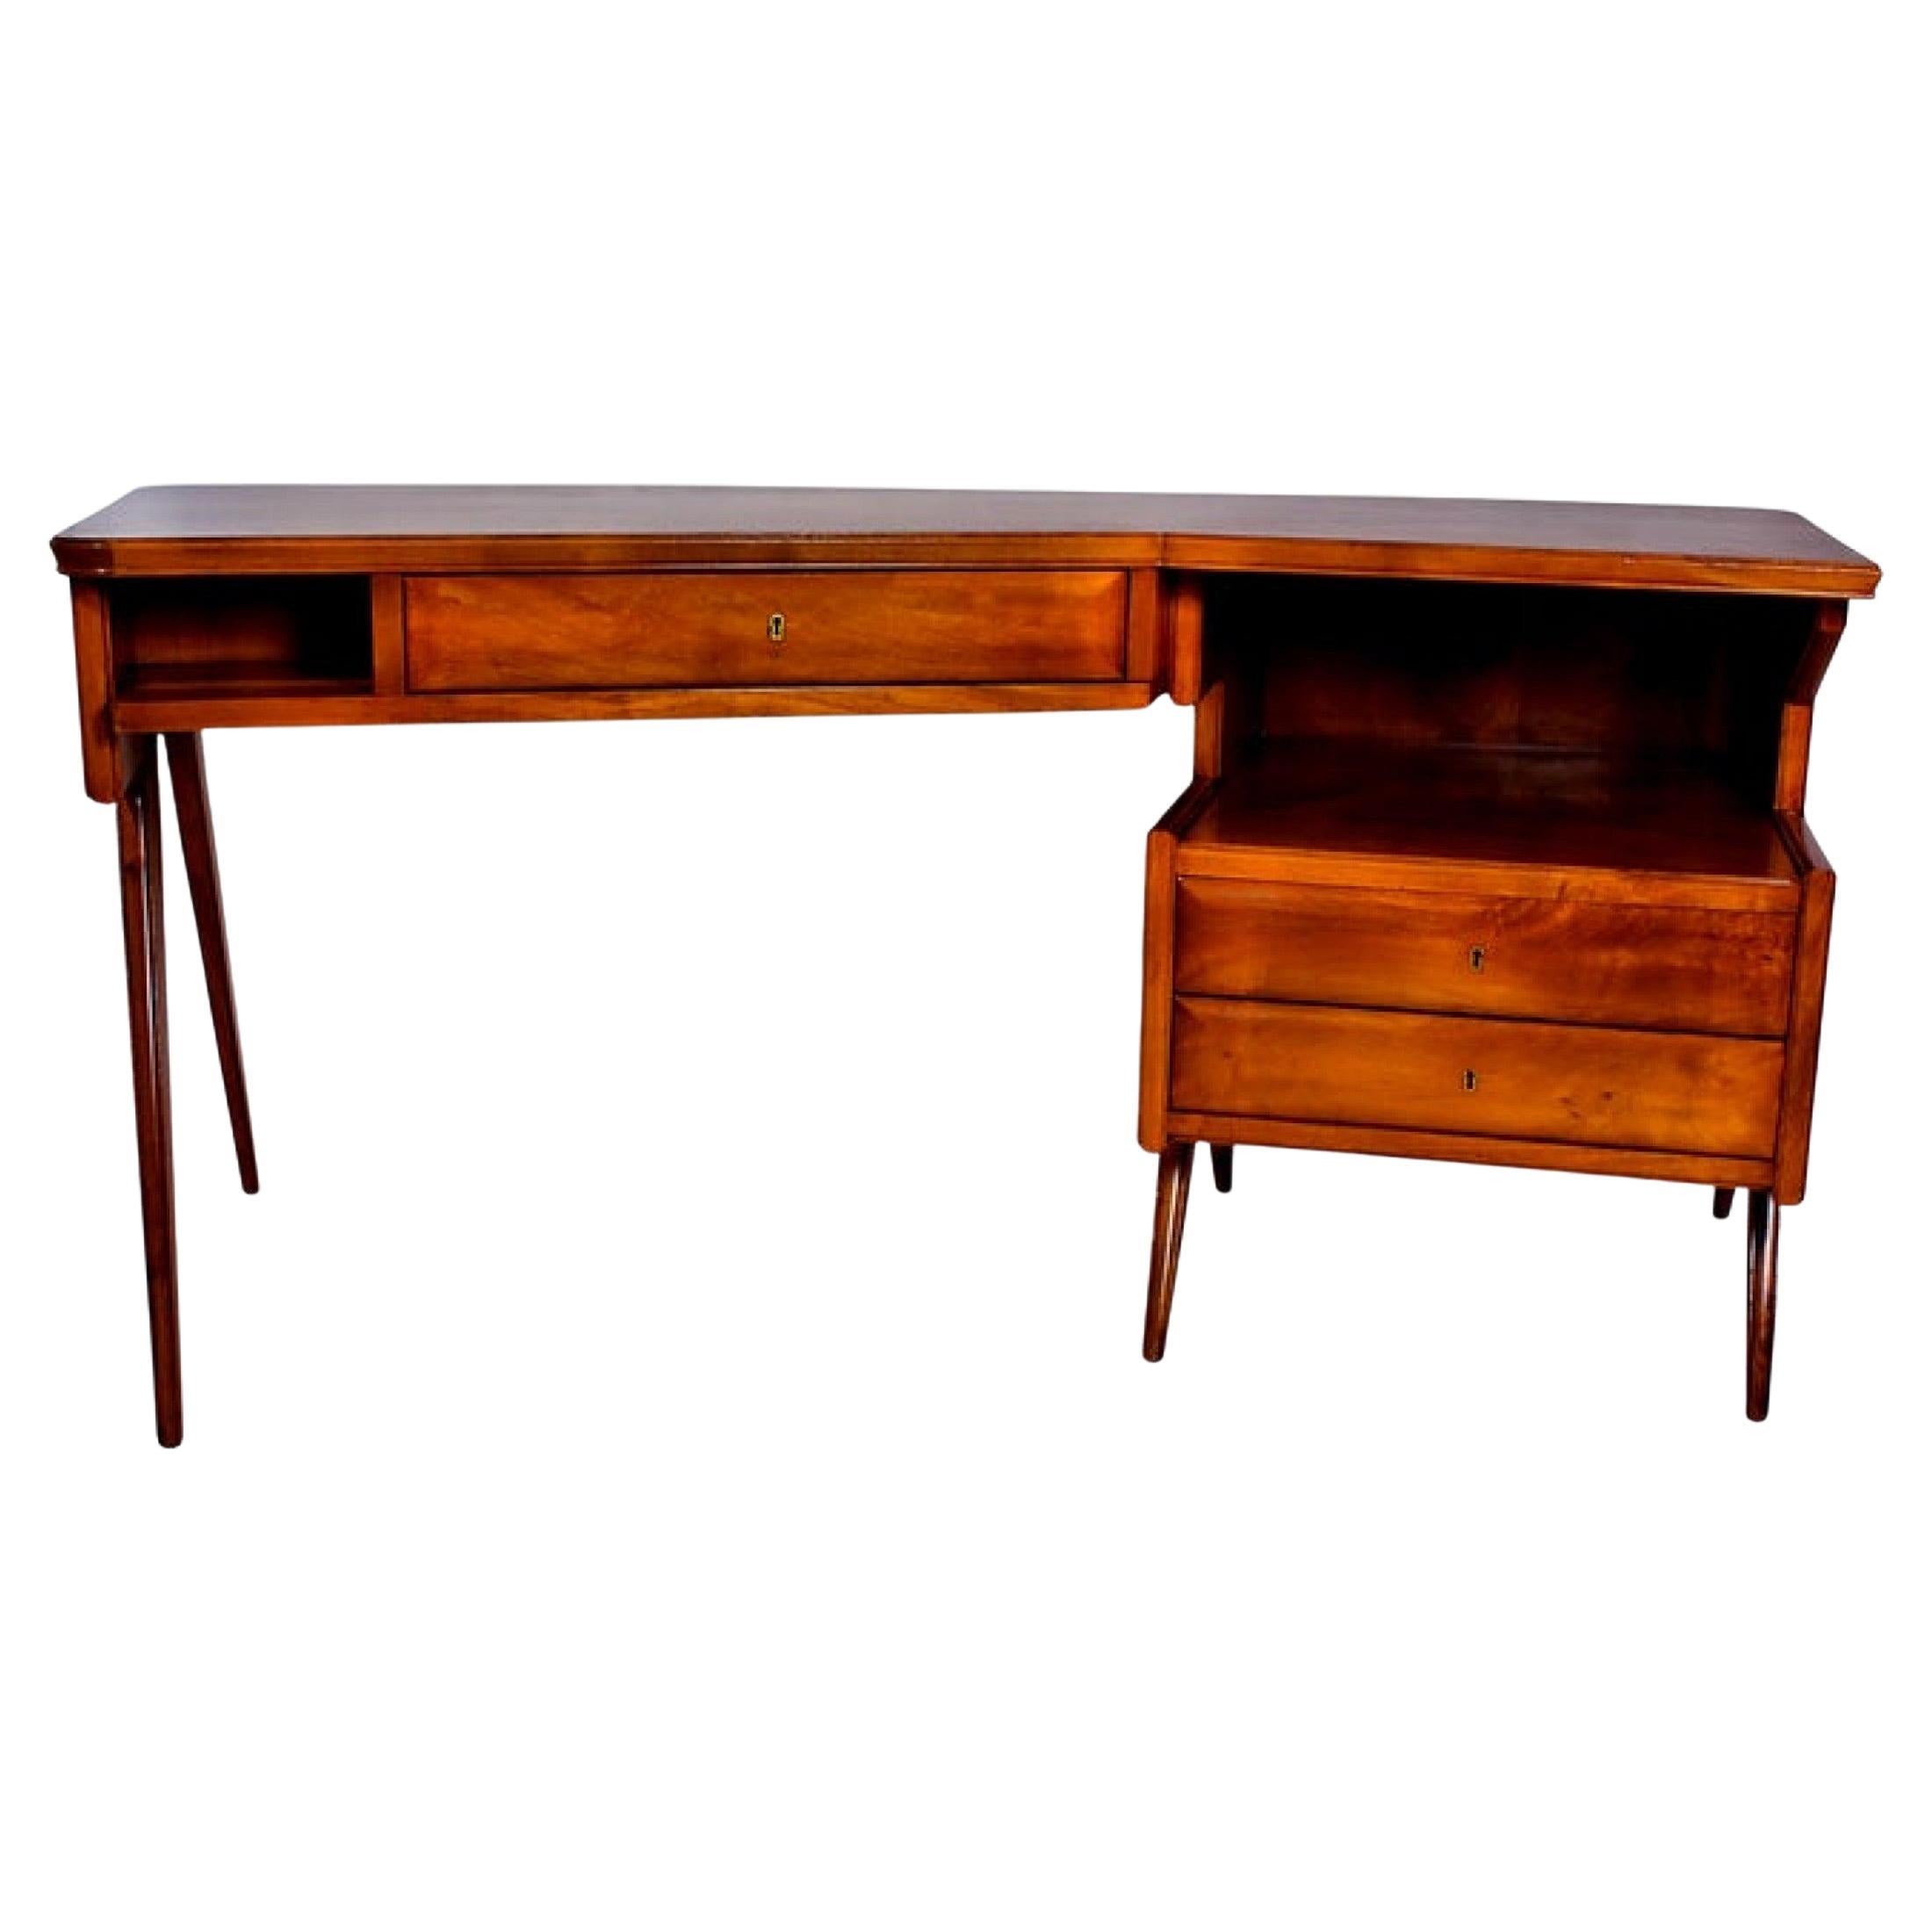 Italian Mid-Century Modern Walnut and Rootwood Desk, attributed to Gio Ponti.